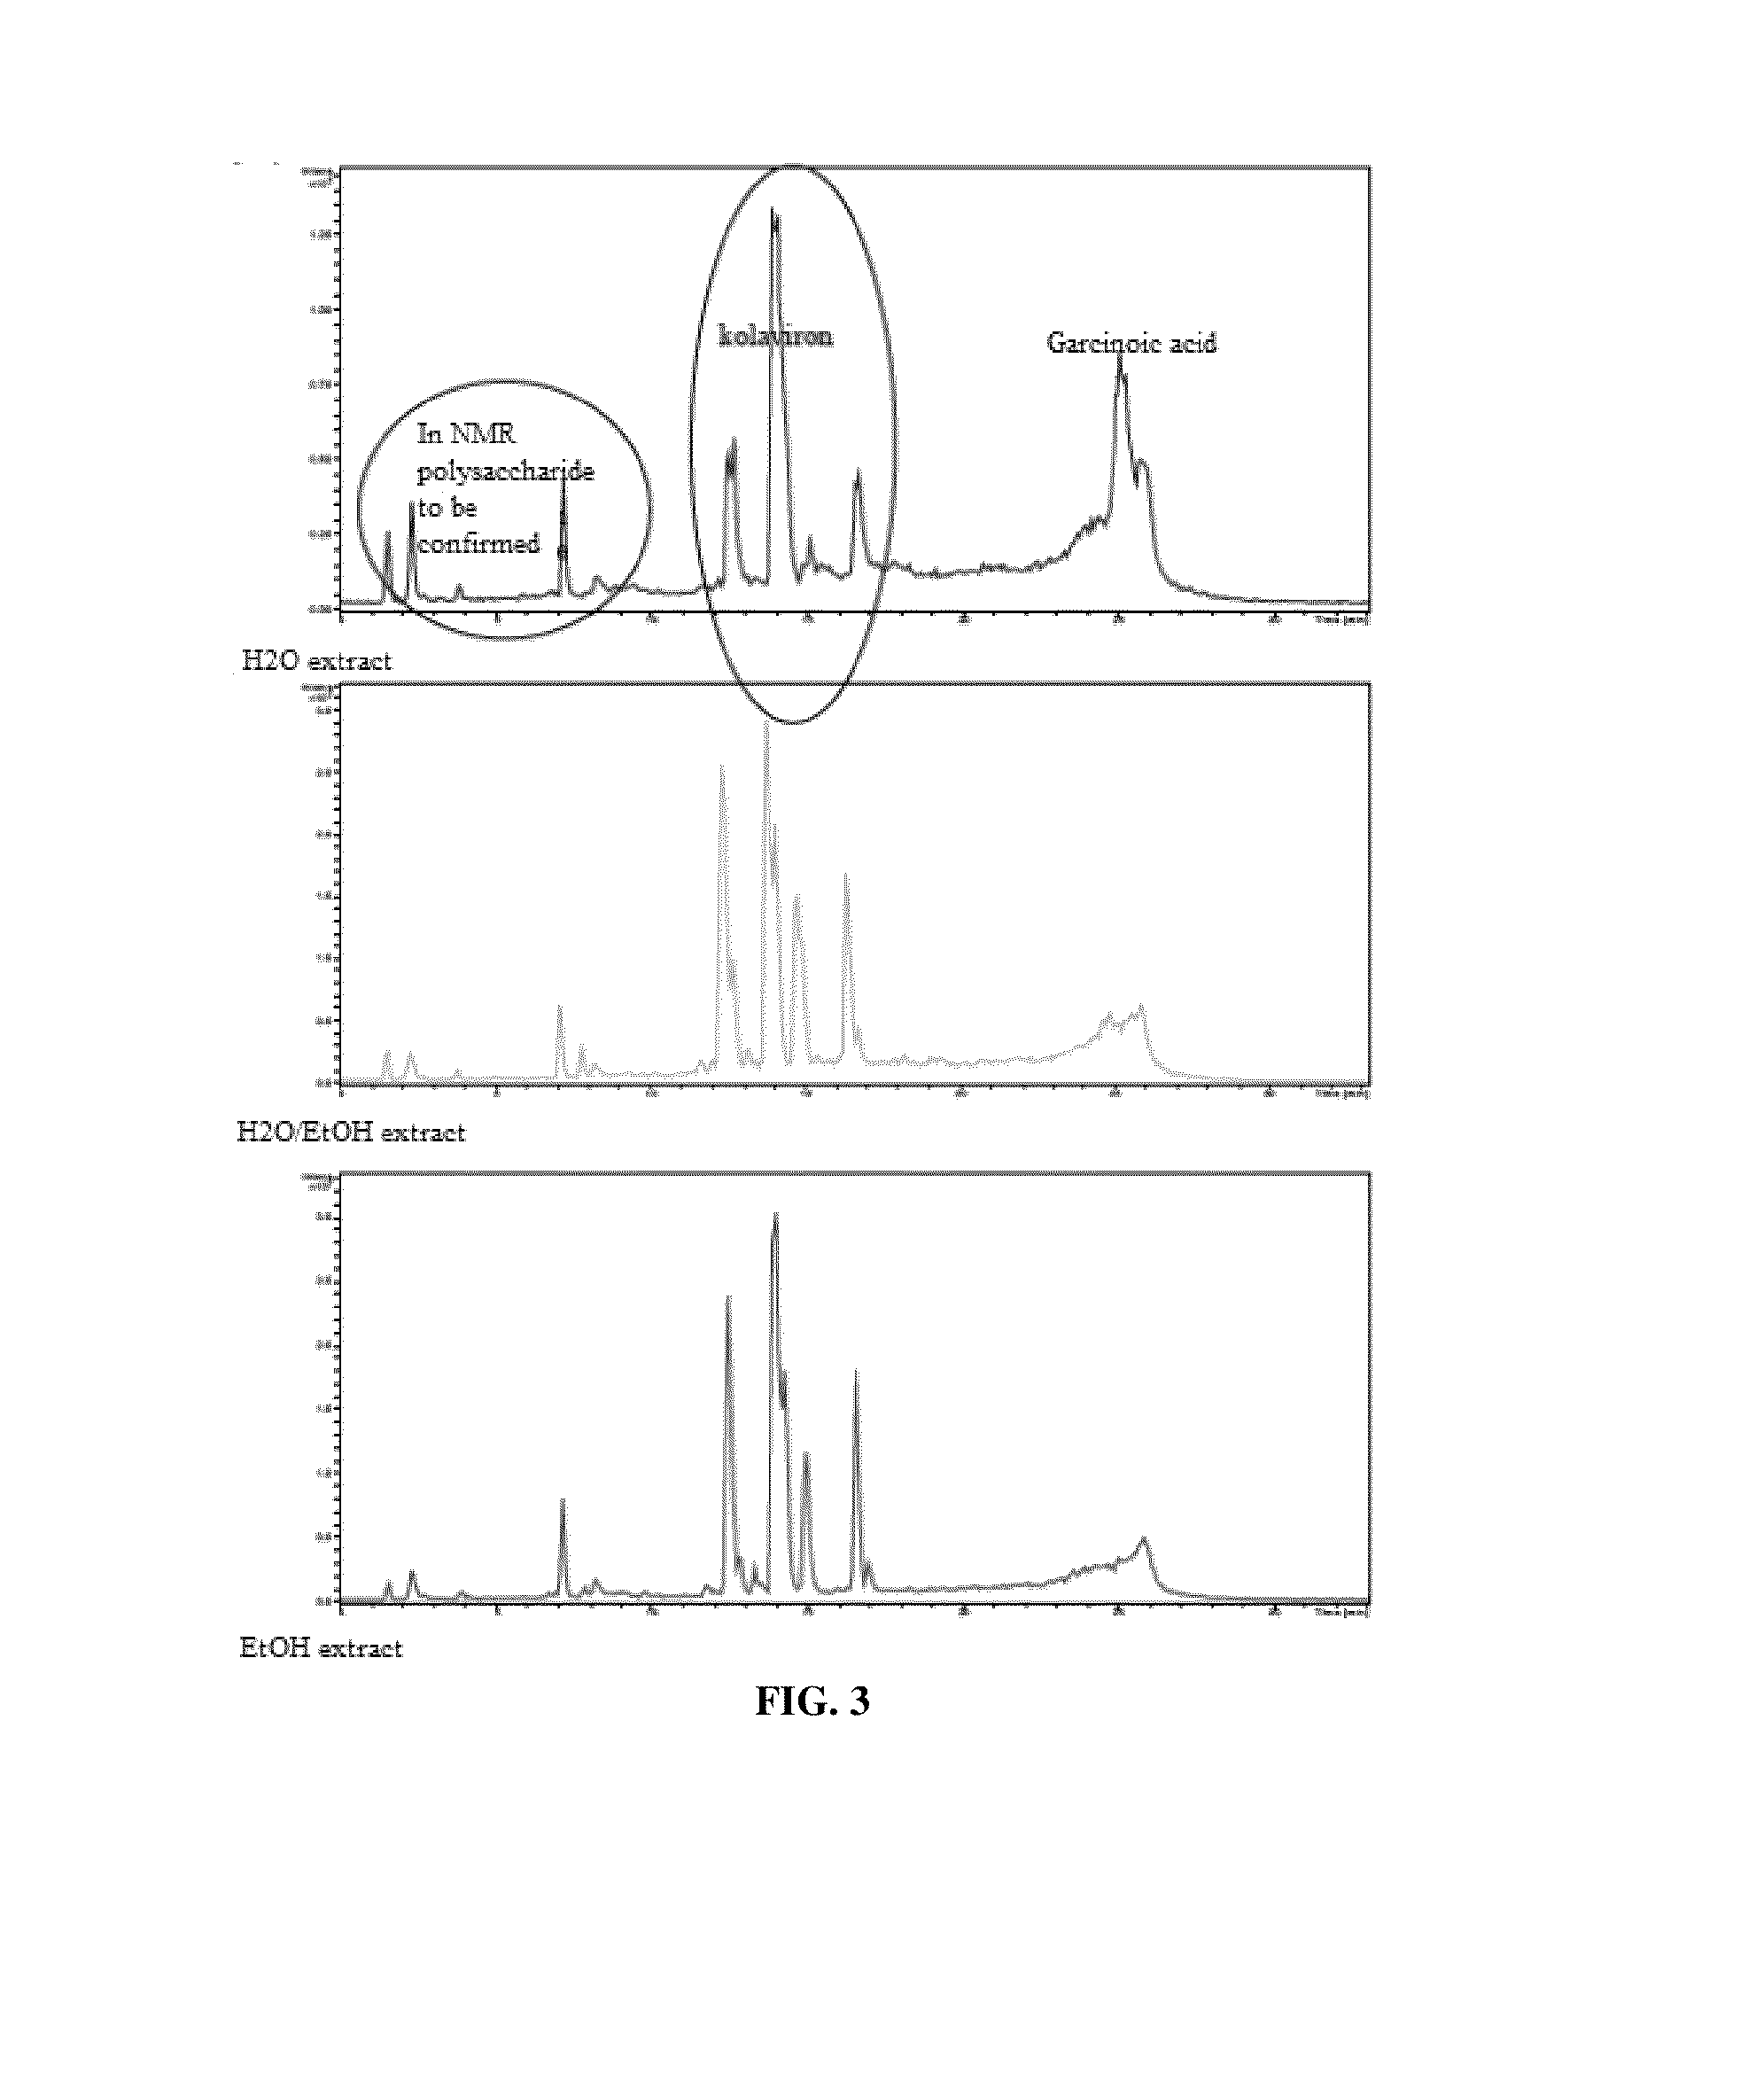 Anti-glycation agent comprising a garcinia kola extract or fraction